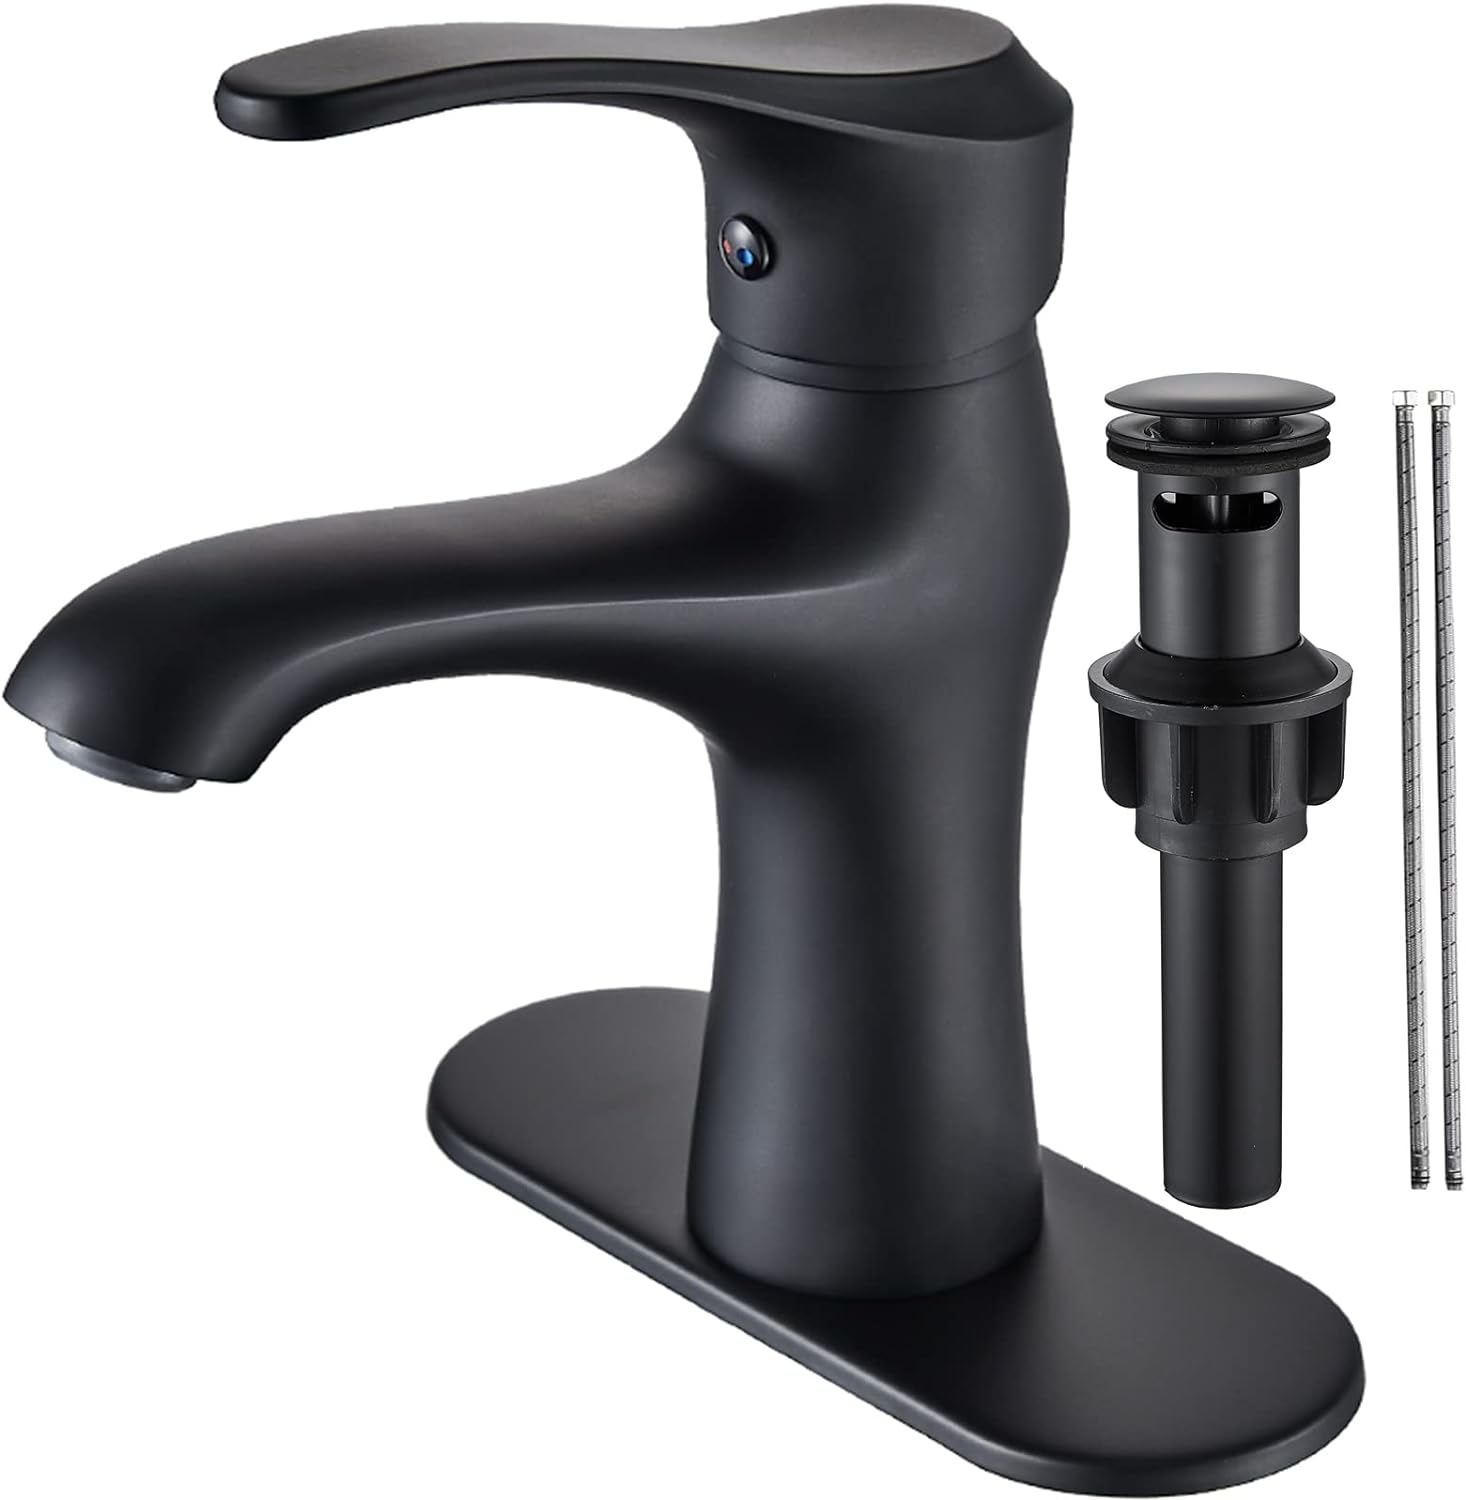 My husband and I are both very impressed with the faucets we bought for our 2 bathrooms. They are very well made. They are pleasing to the eye, and easy to install. I highly recommend this faucet. For under $40 you get a product that looks high end.